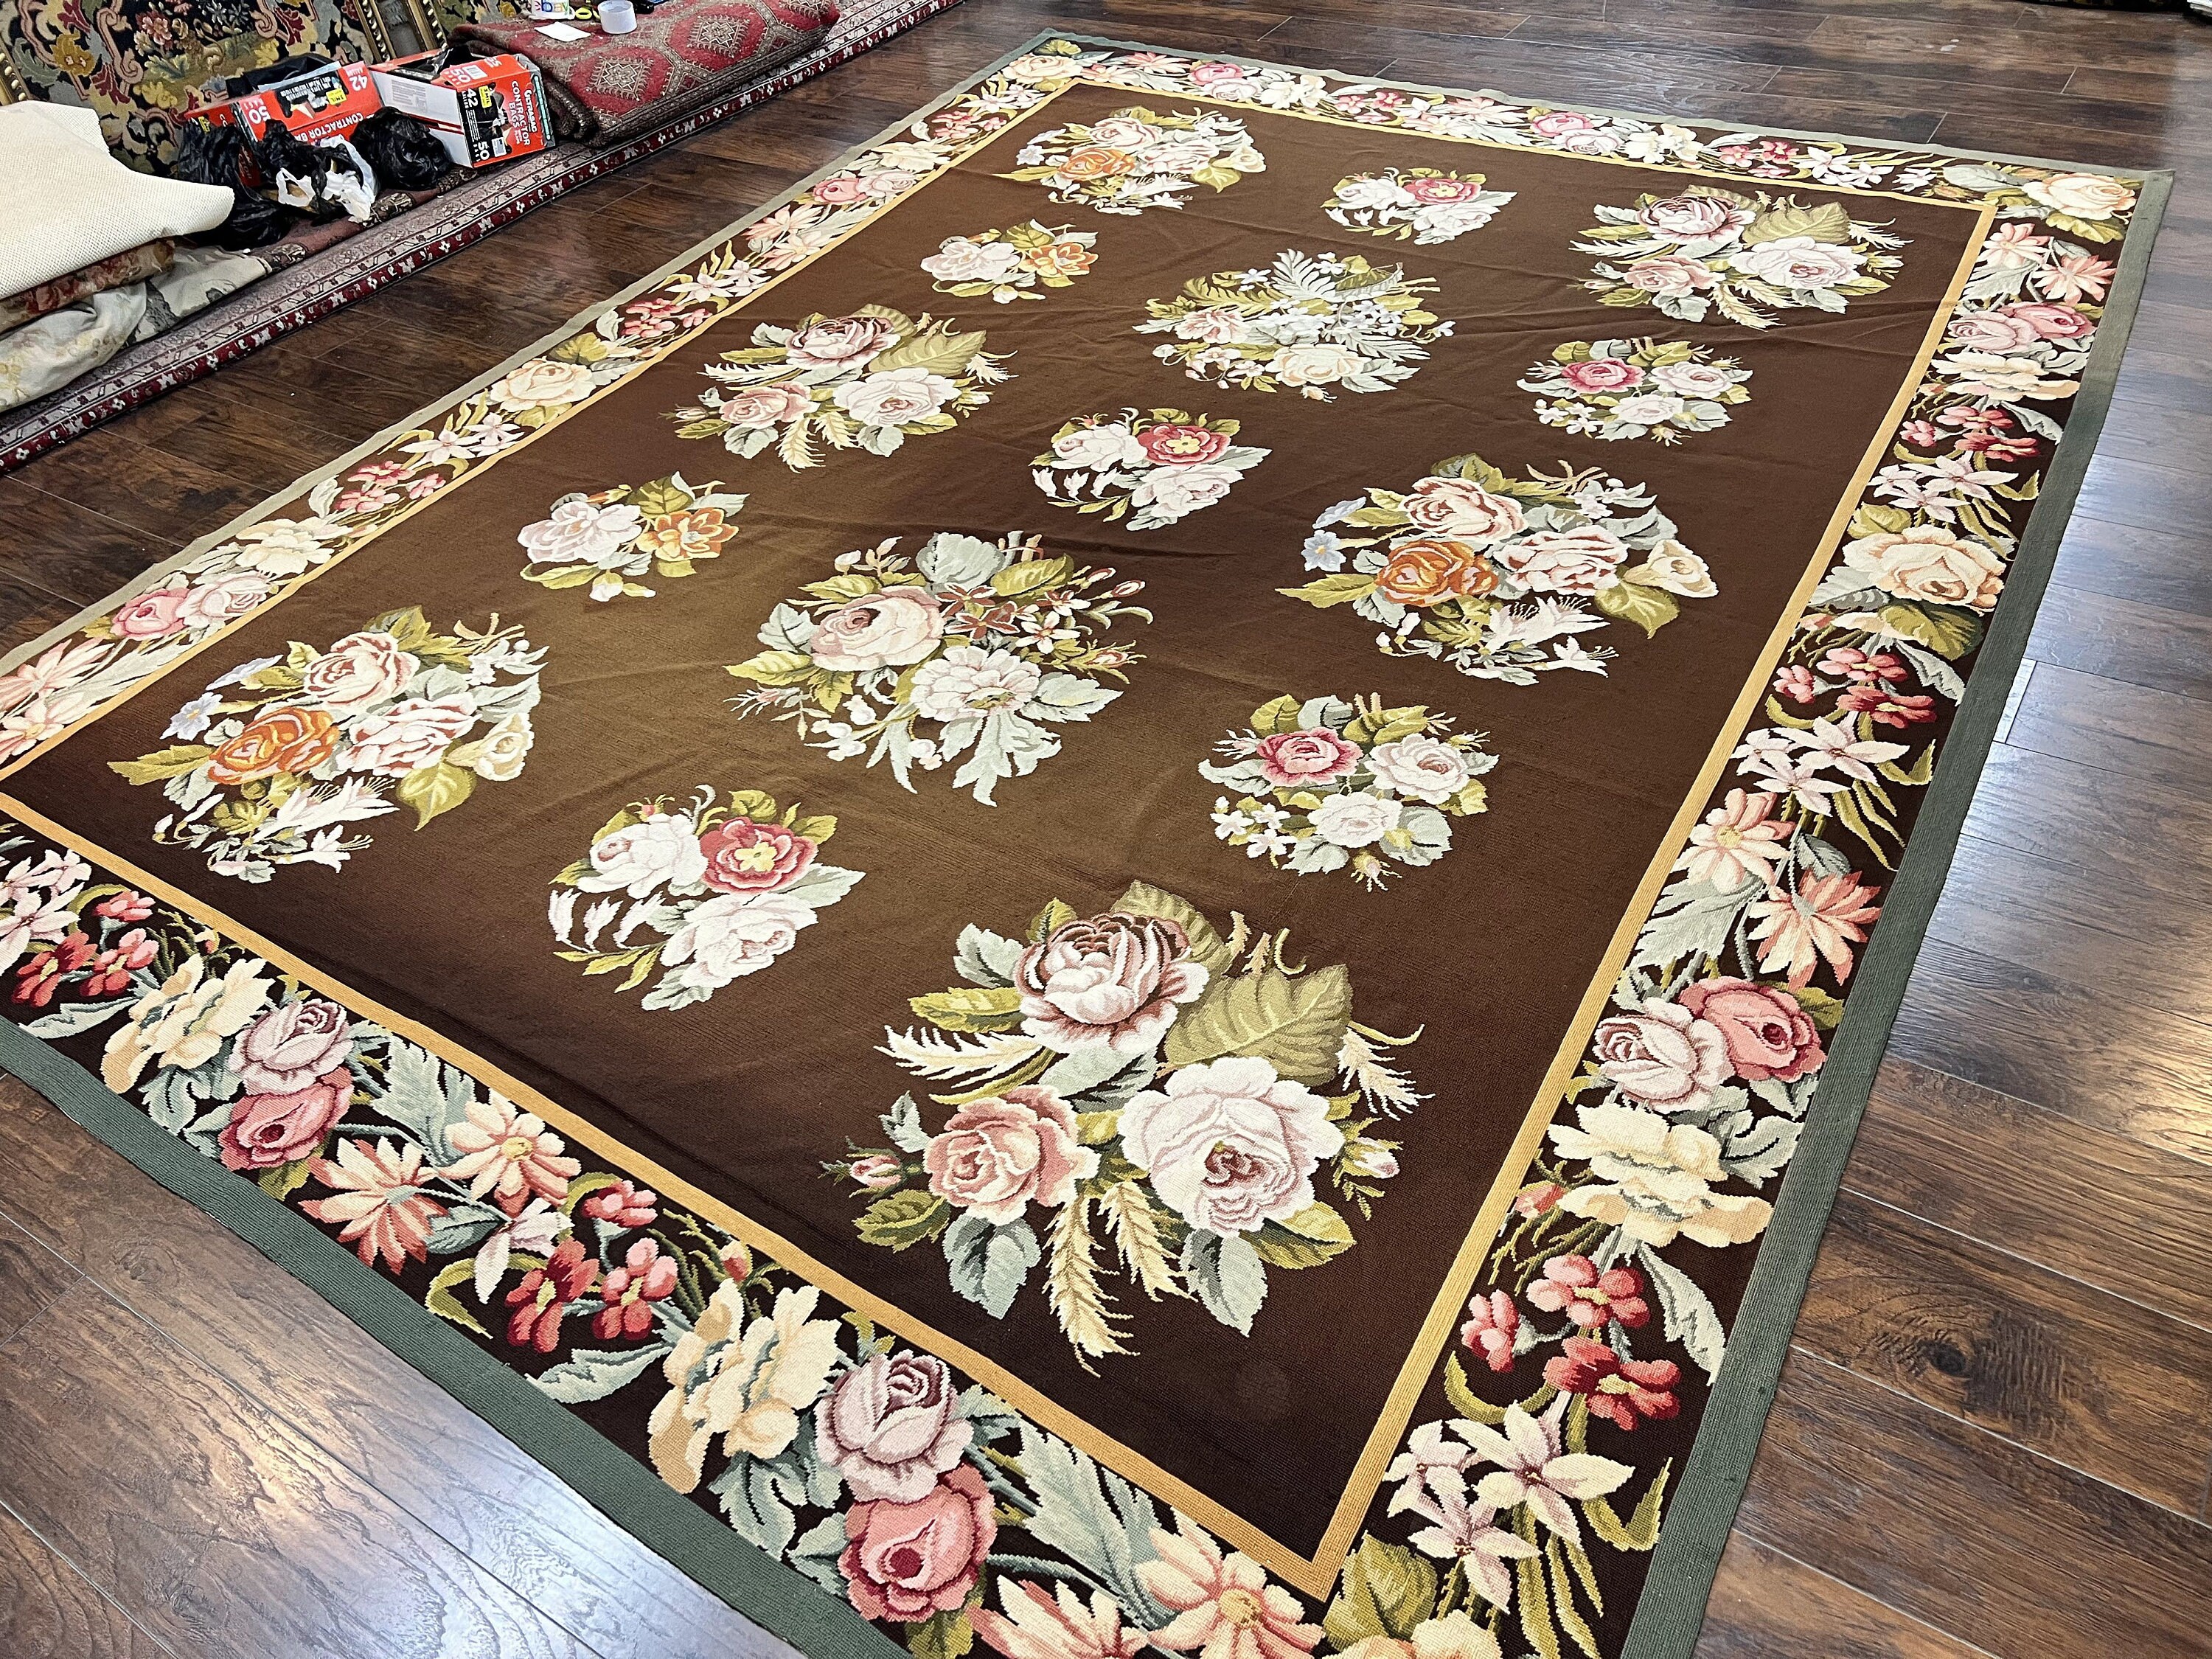 4x3 Feet,antique Aubusson Rug,needlepoint Rug,pictorial Rug,hand Made  Kilim,area Rug, Floral Mat ,home Décor,119x89 Cm Free Shipping 